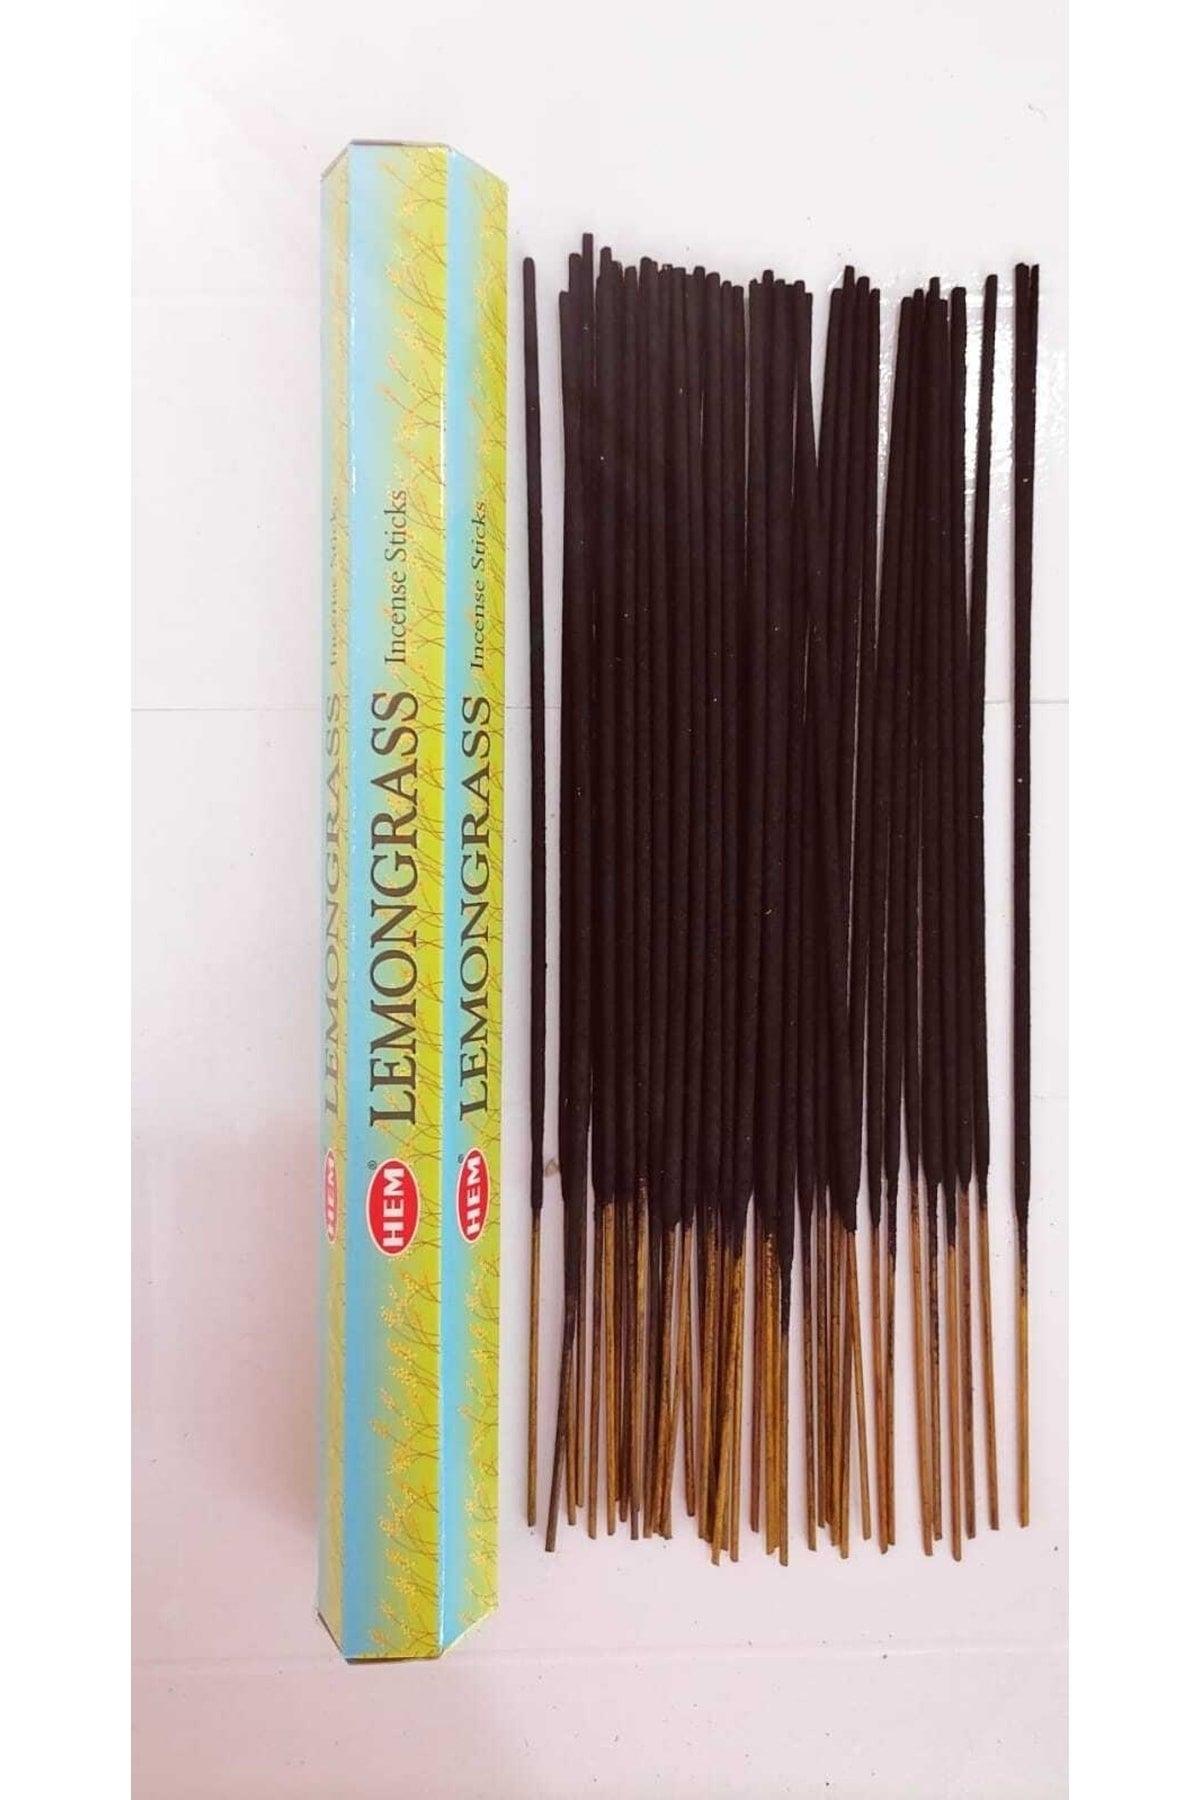 1 Box Stick Incense Stick With Lemon Grass Scented 20 Pieces - Swordslife